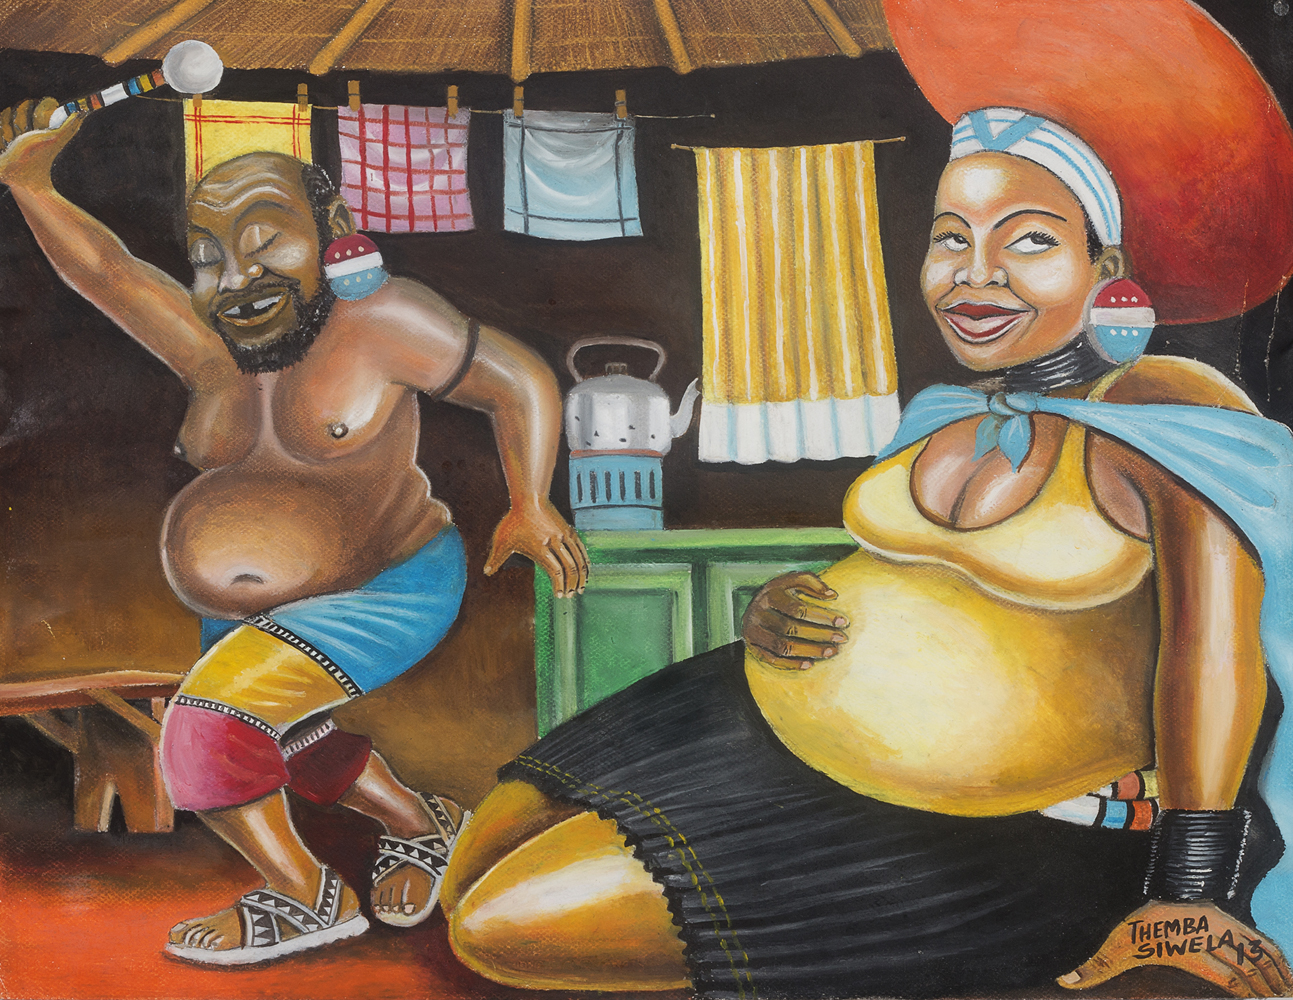 Themba Siwela - We lay down as two and woke up as three, 2013